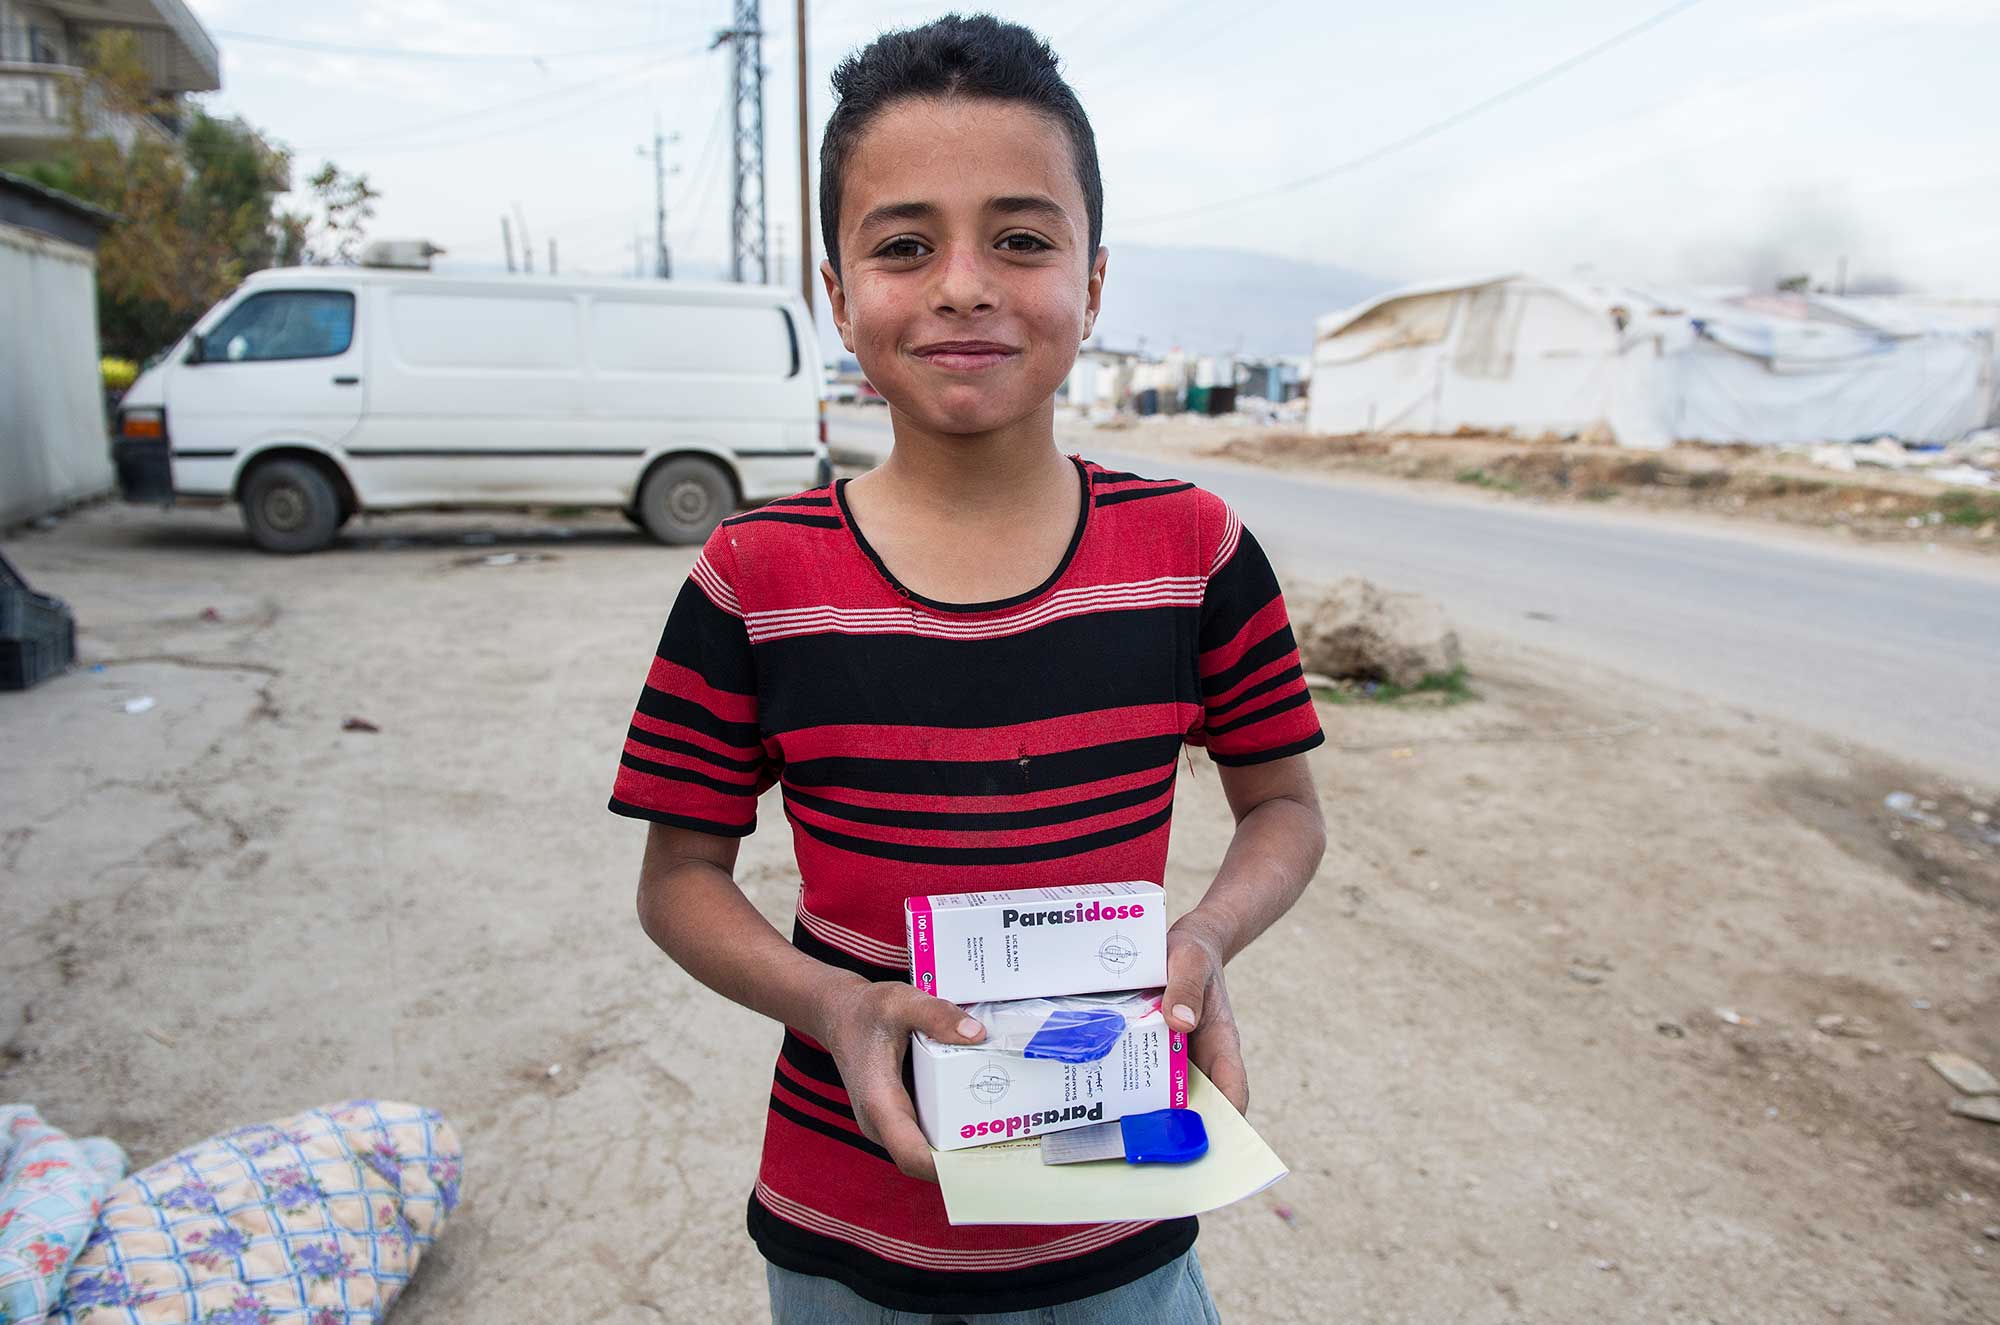 Better health education combined with proper medical treatment means healthier and safer communities for Syrian refugees in Lebanon. ©Ron Coello, photographer